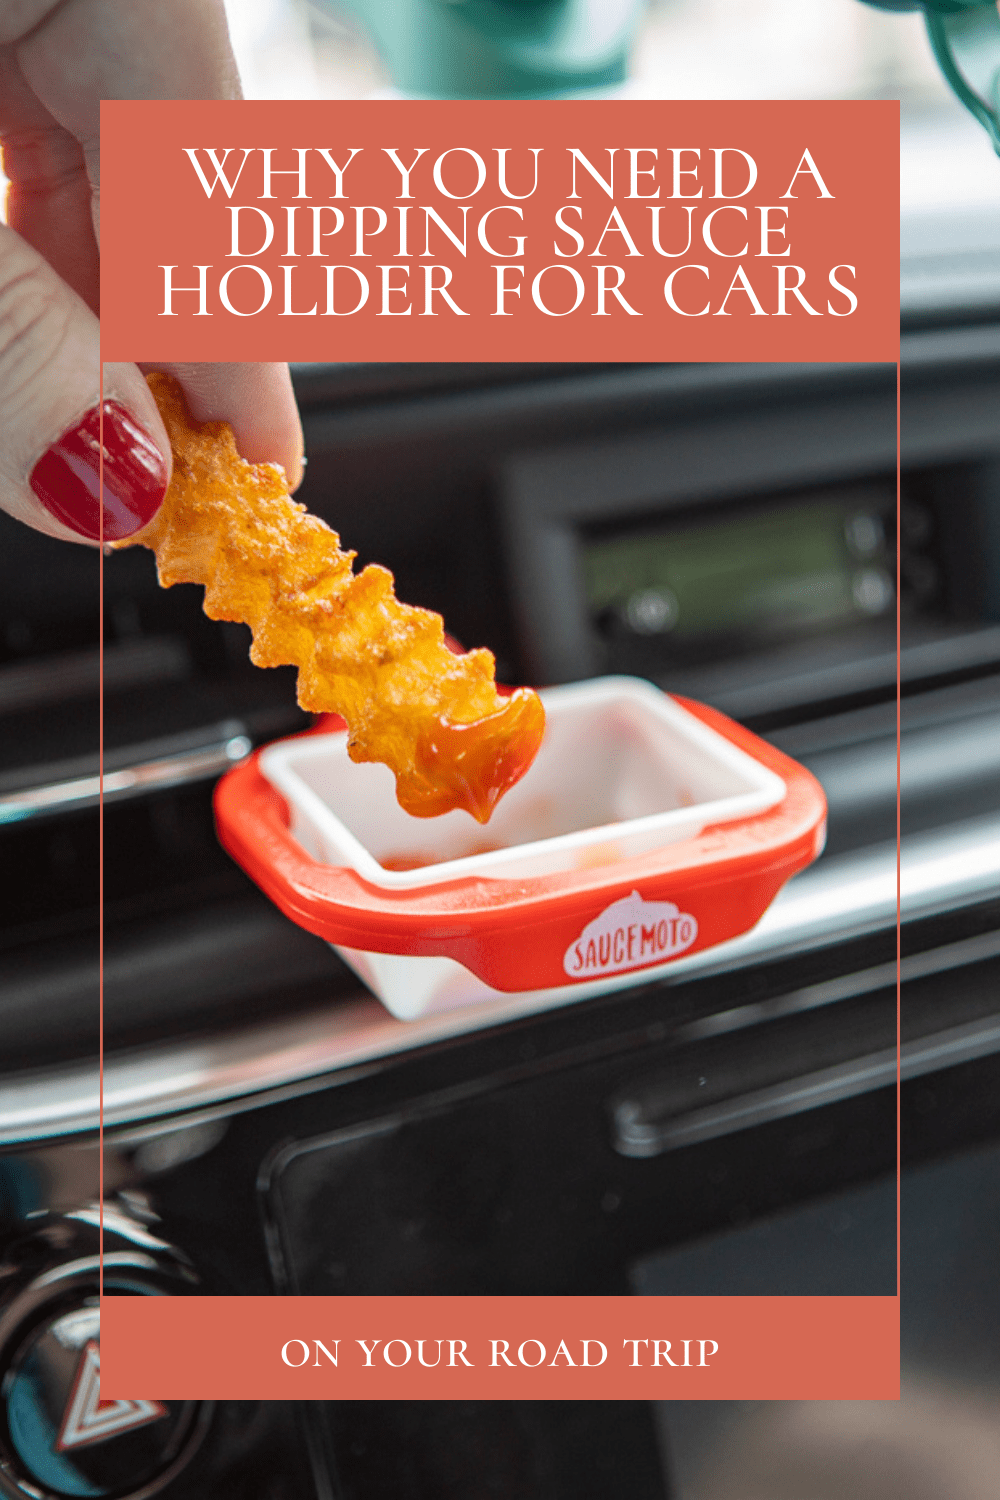 If you love taking road trips, here is something unusual that you just have to pack: a Saucemoto dipping sauce holder for cars. A car dipping sauce holder, like the Saucemoto Dip Clip, clips into your car's air vent and provides a convenient container for whatever condiment you prefer. Click through to find out why this is a must have road trip accessory! #RoadTrip #FastFood #DippingSauce #Condiments #RoadTripFood #Saucemoto